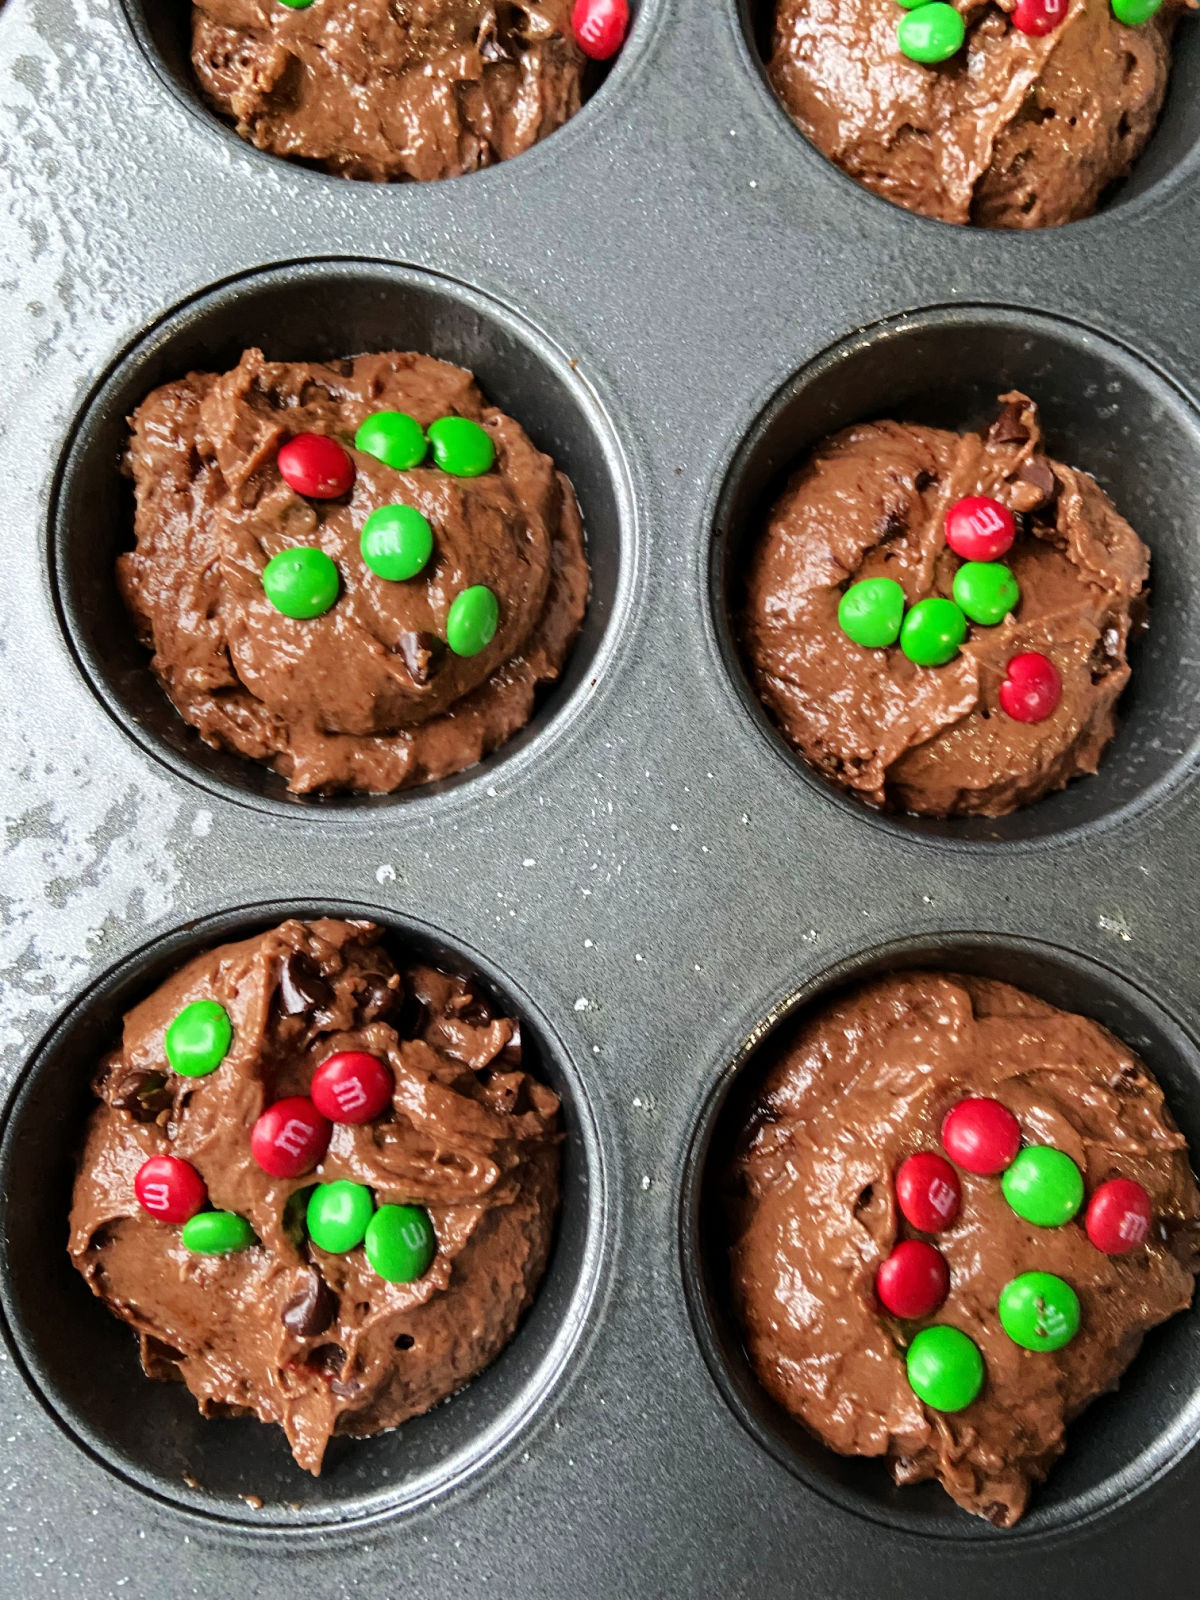 uncooked chocolate muffins